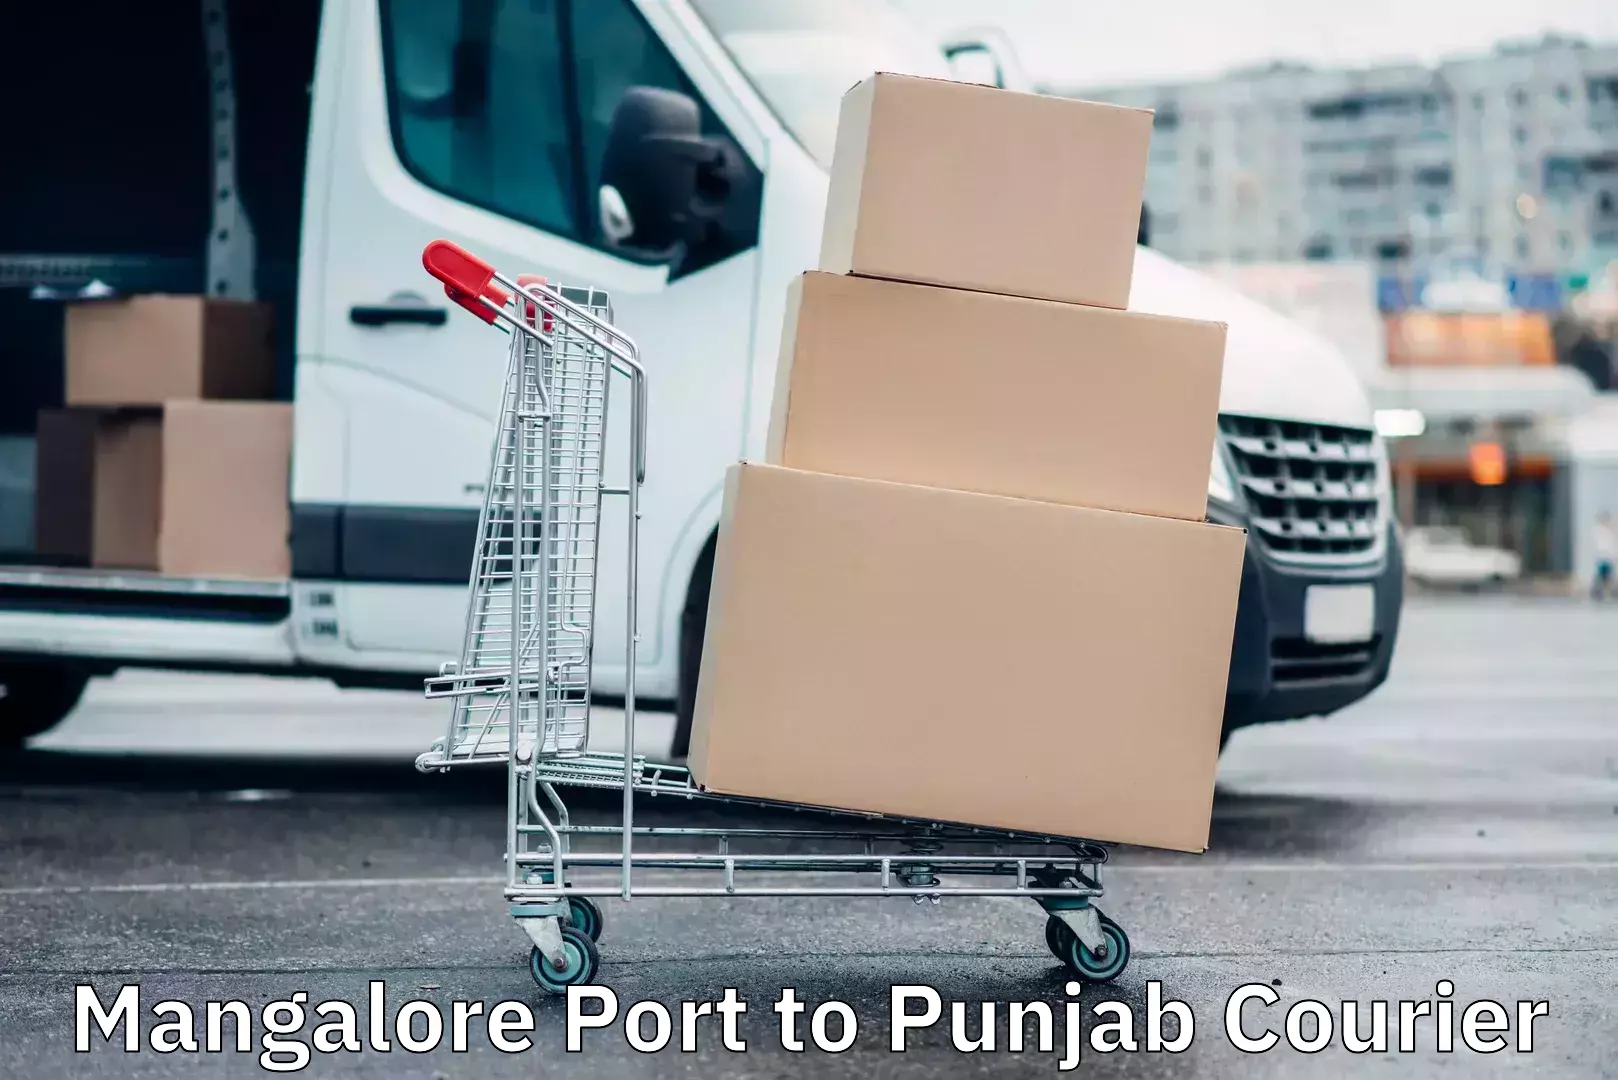 Cost-effective shipping solutions Mangalore Port to Punjab